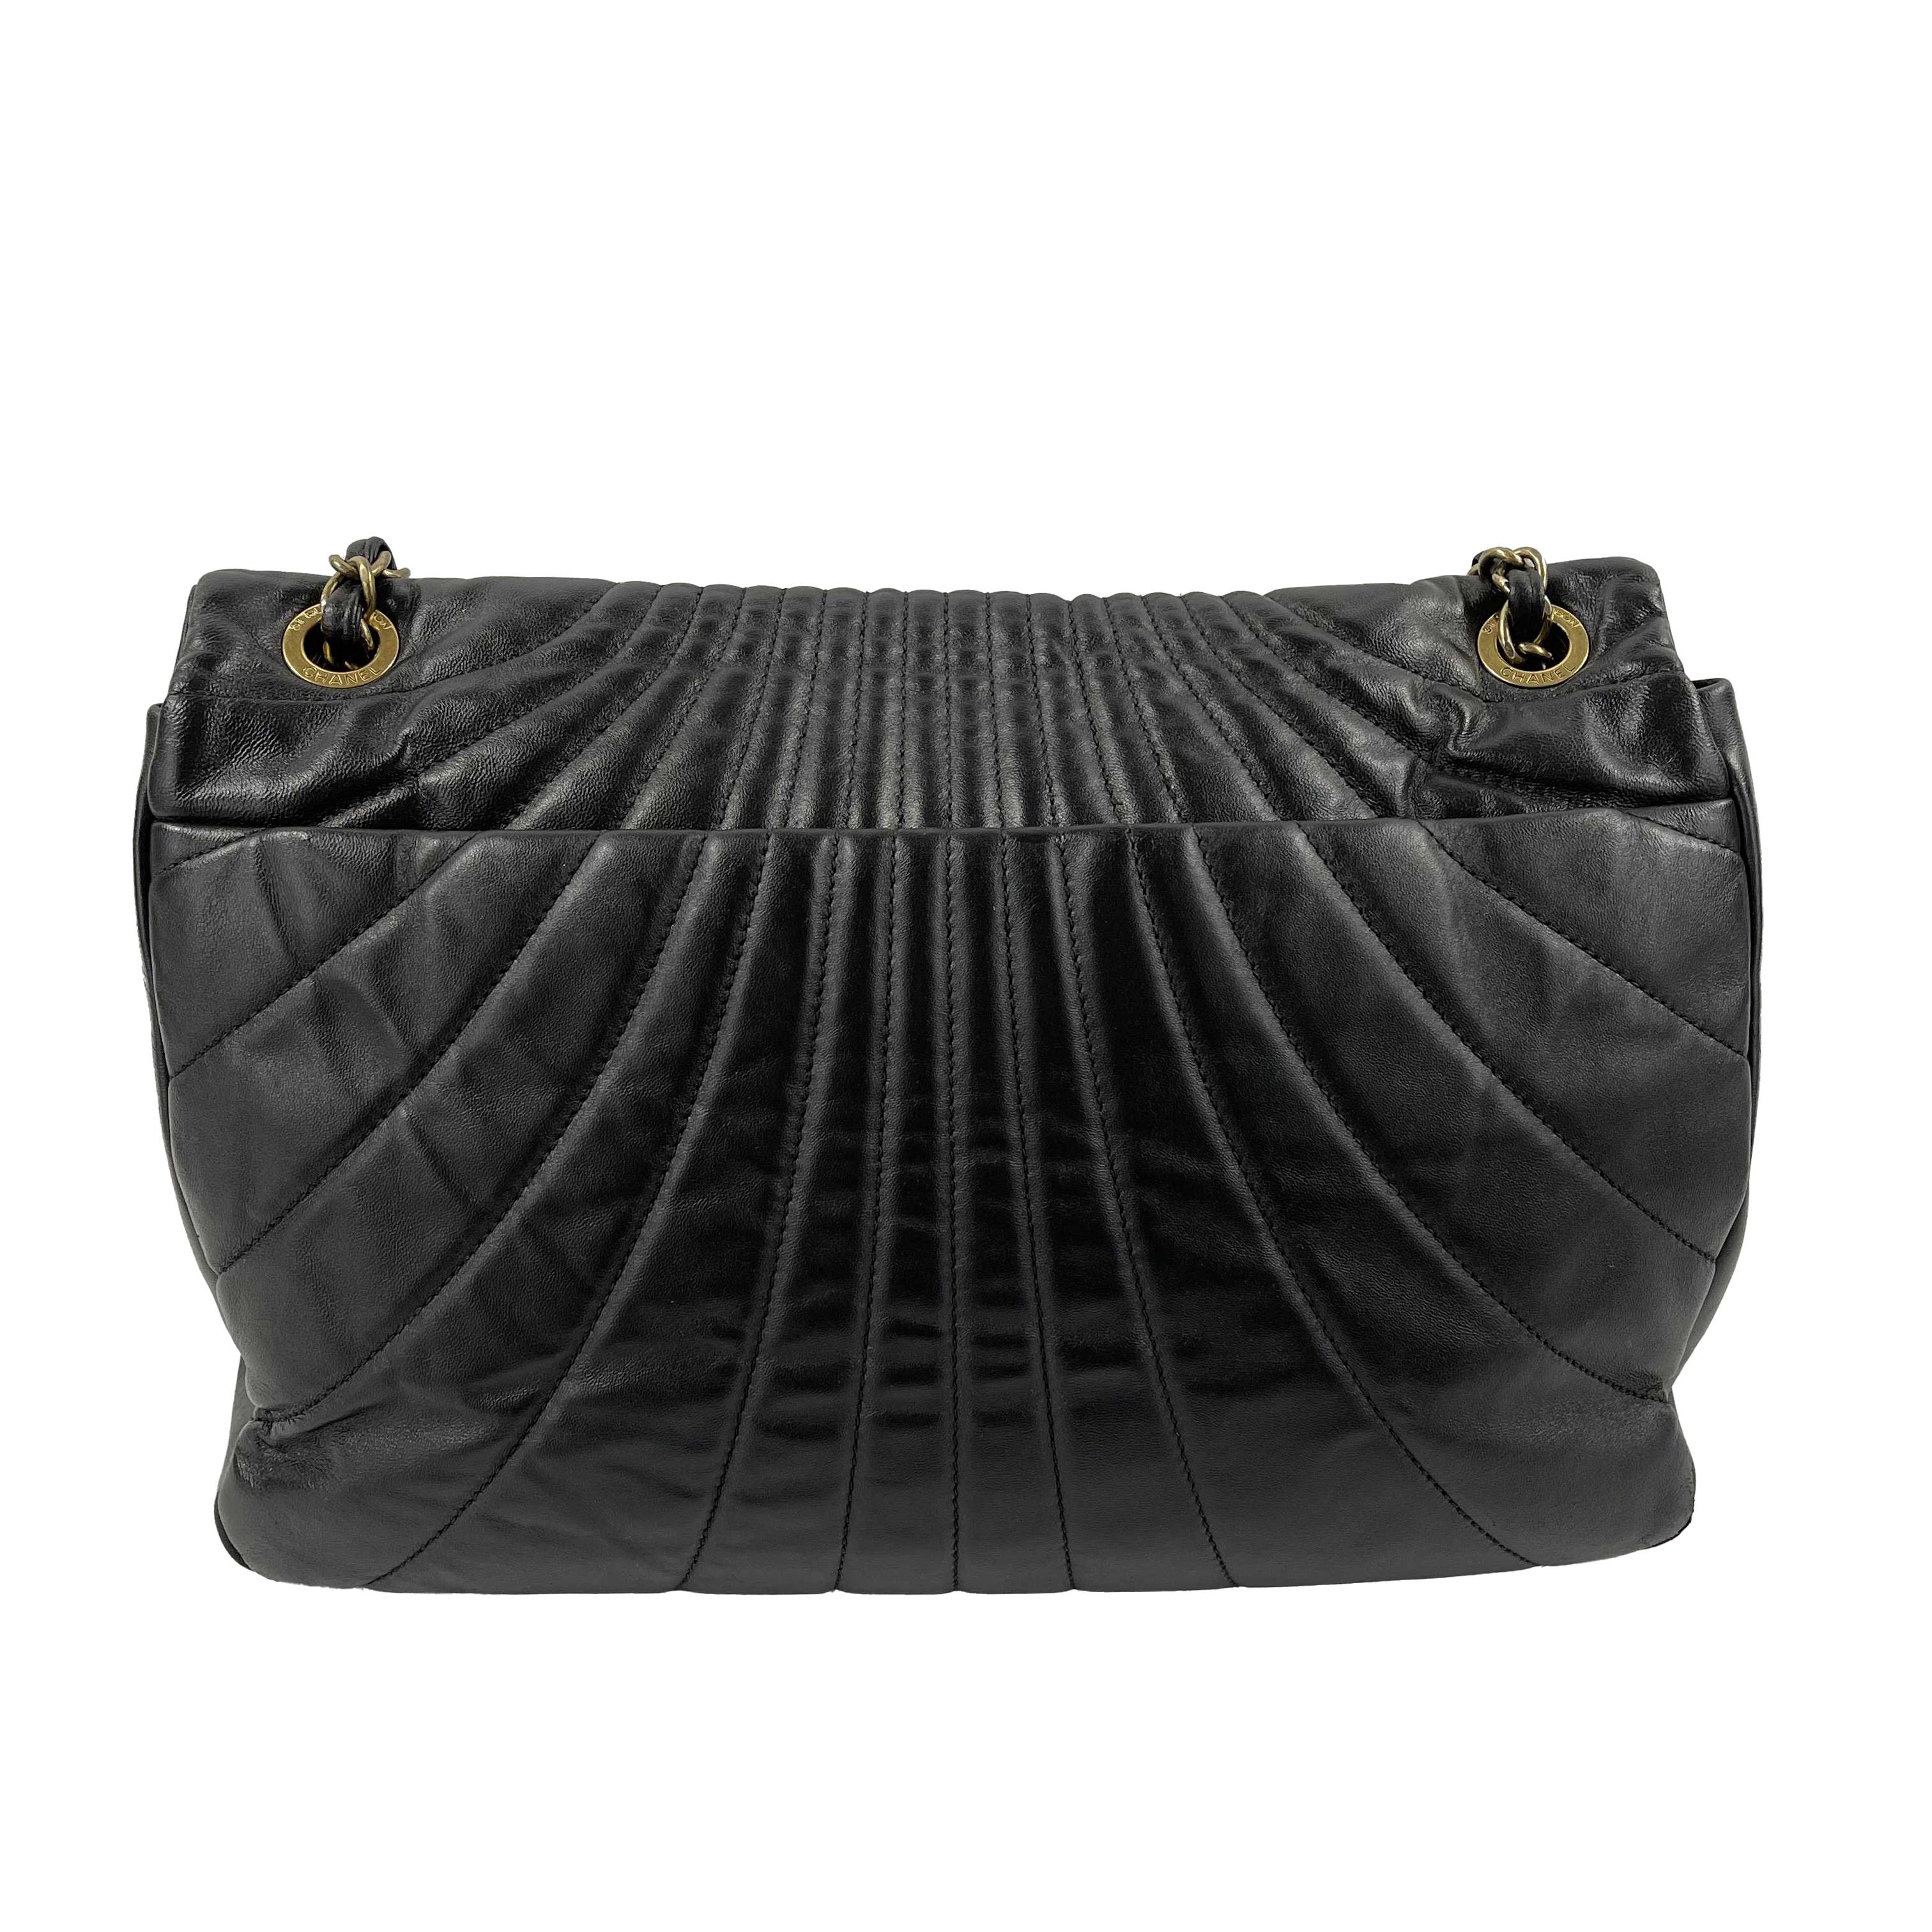 CHANEL - Wave Quilted Black Calfskin Leather Maxi Flap - Gold-tone Shoulder Bag 

Description

Chanel Wave Quilted Leather Maxi Flap from the 2009-2010 collection.
Crafted in black lambskin leather, designed with quilted stitching throughout,